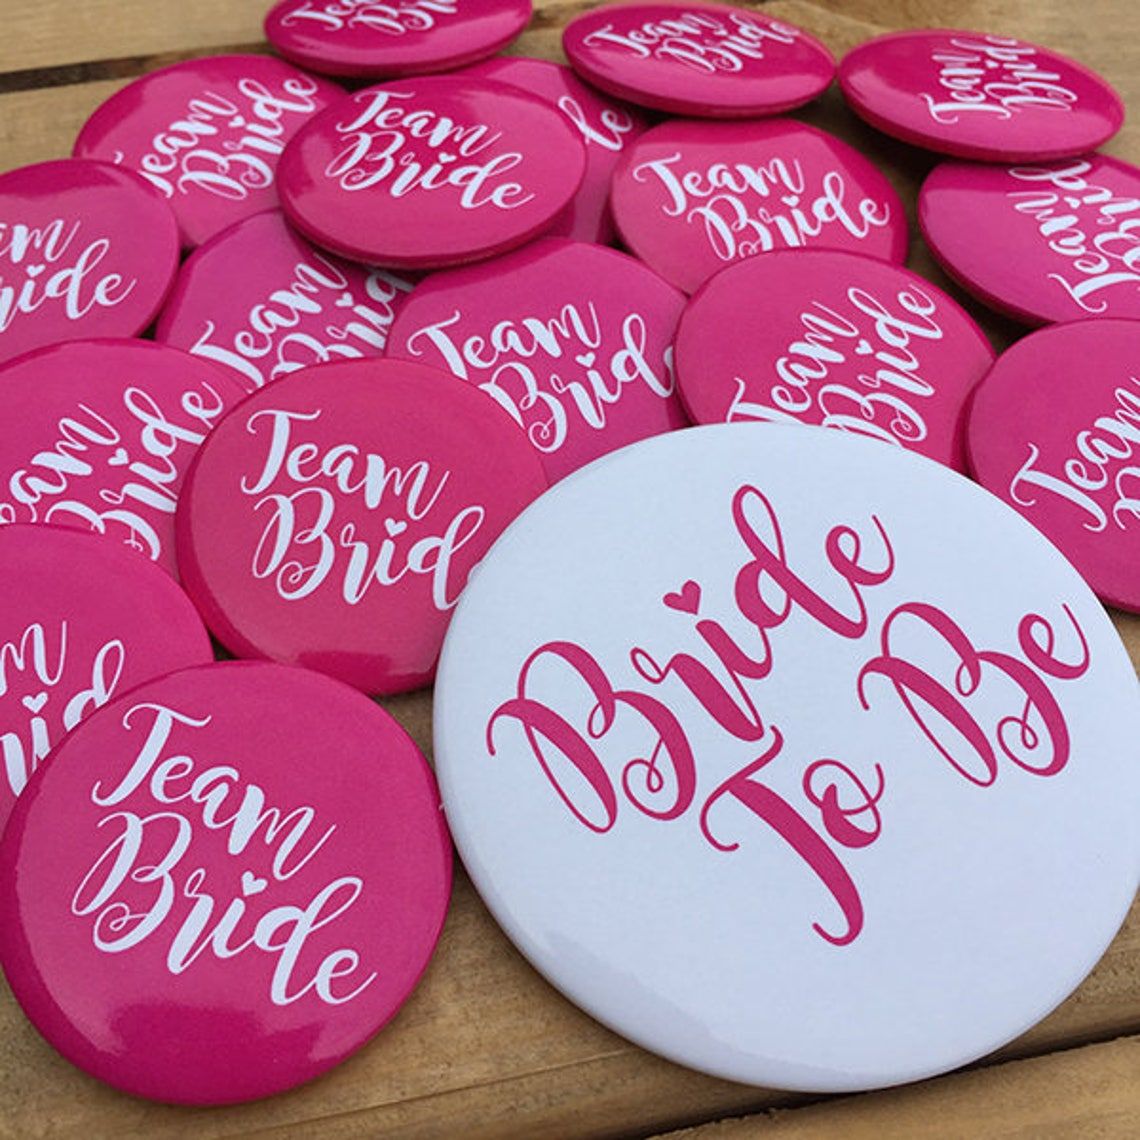 Team Bride Hen Party Badge / Bride to Be - Hen Do - Favours - Hen Night Accessories